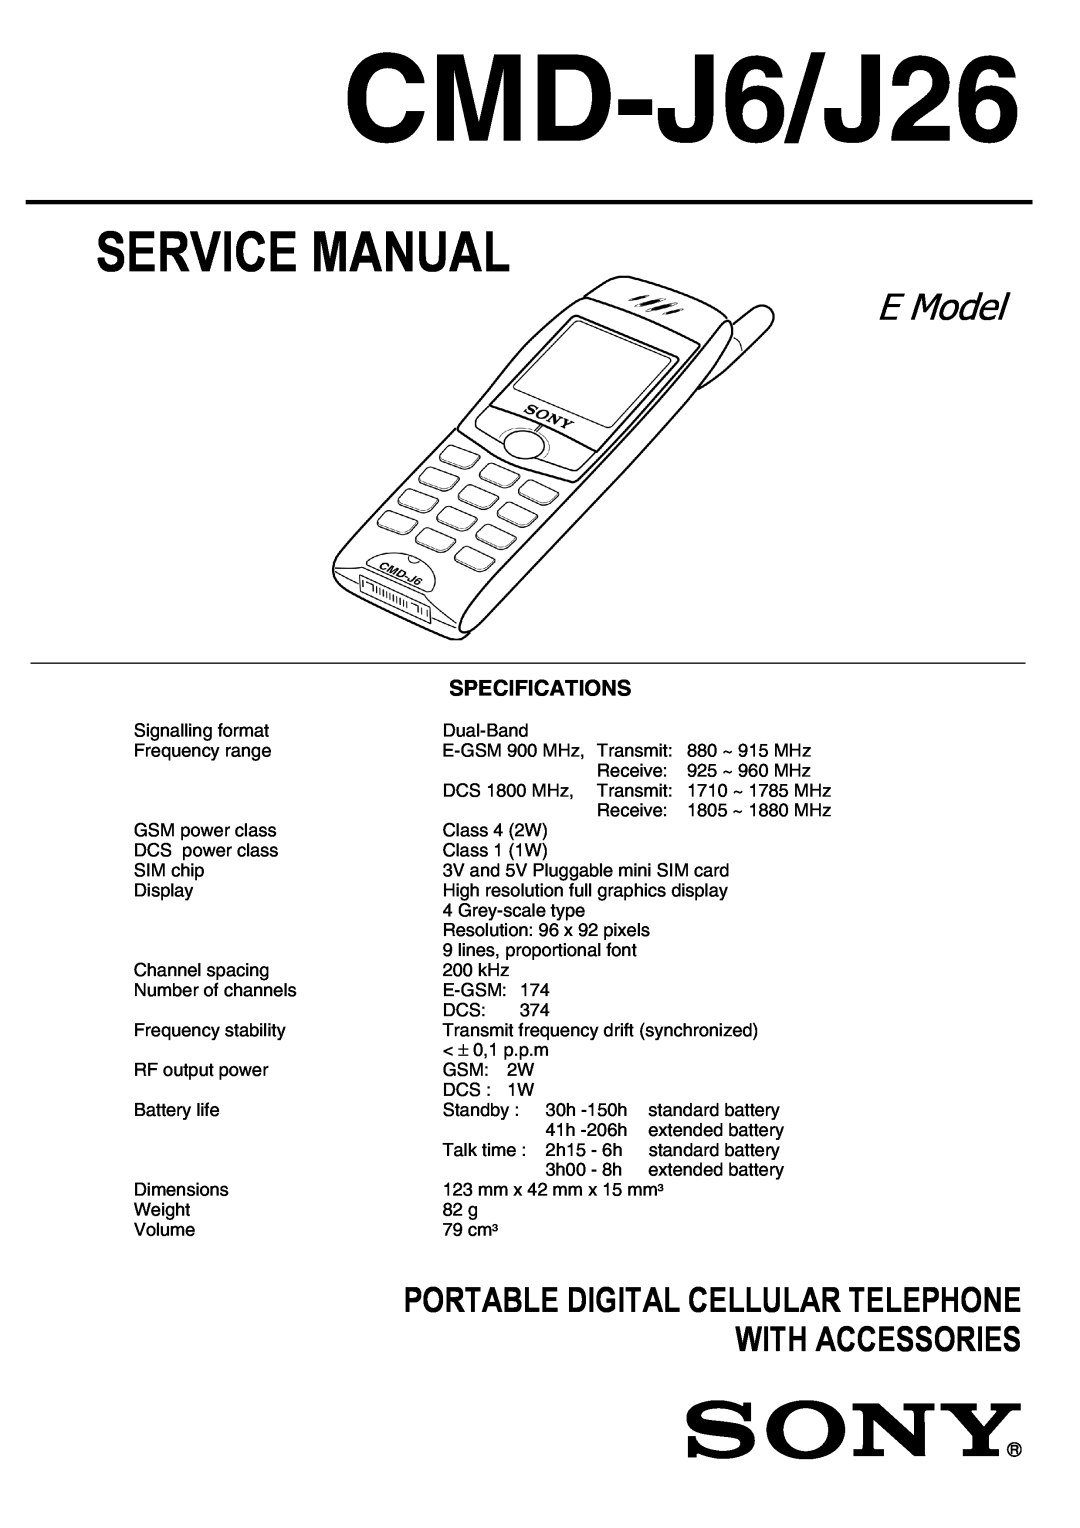 Sony CMD-J26 specifications Service Manual, E Model, Portable Digital Cellular Telephone With Accessories, $/$01, $%#$ 